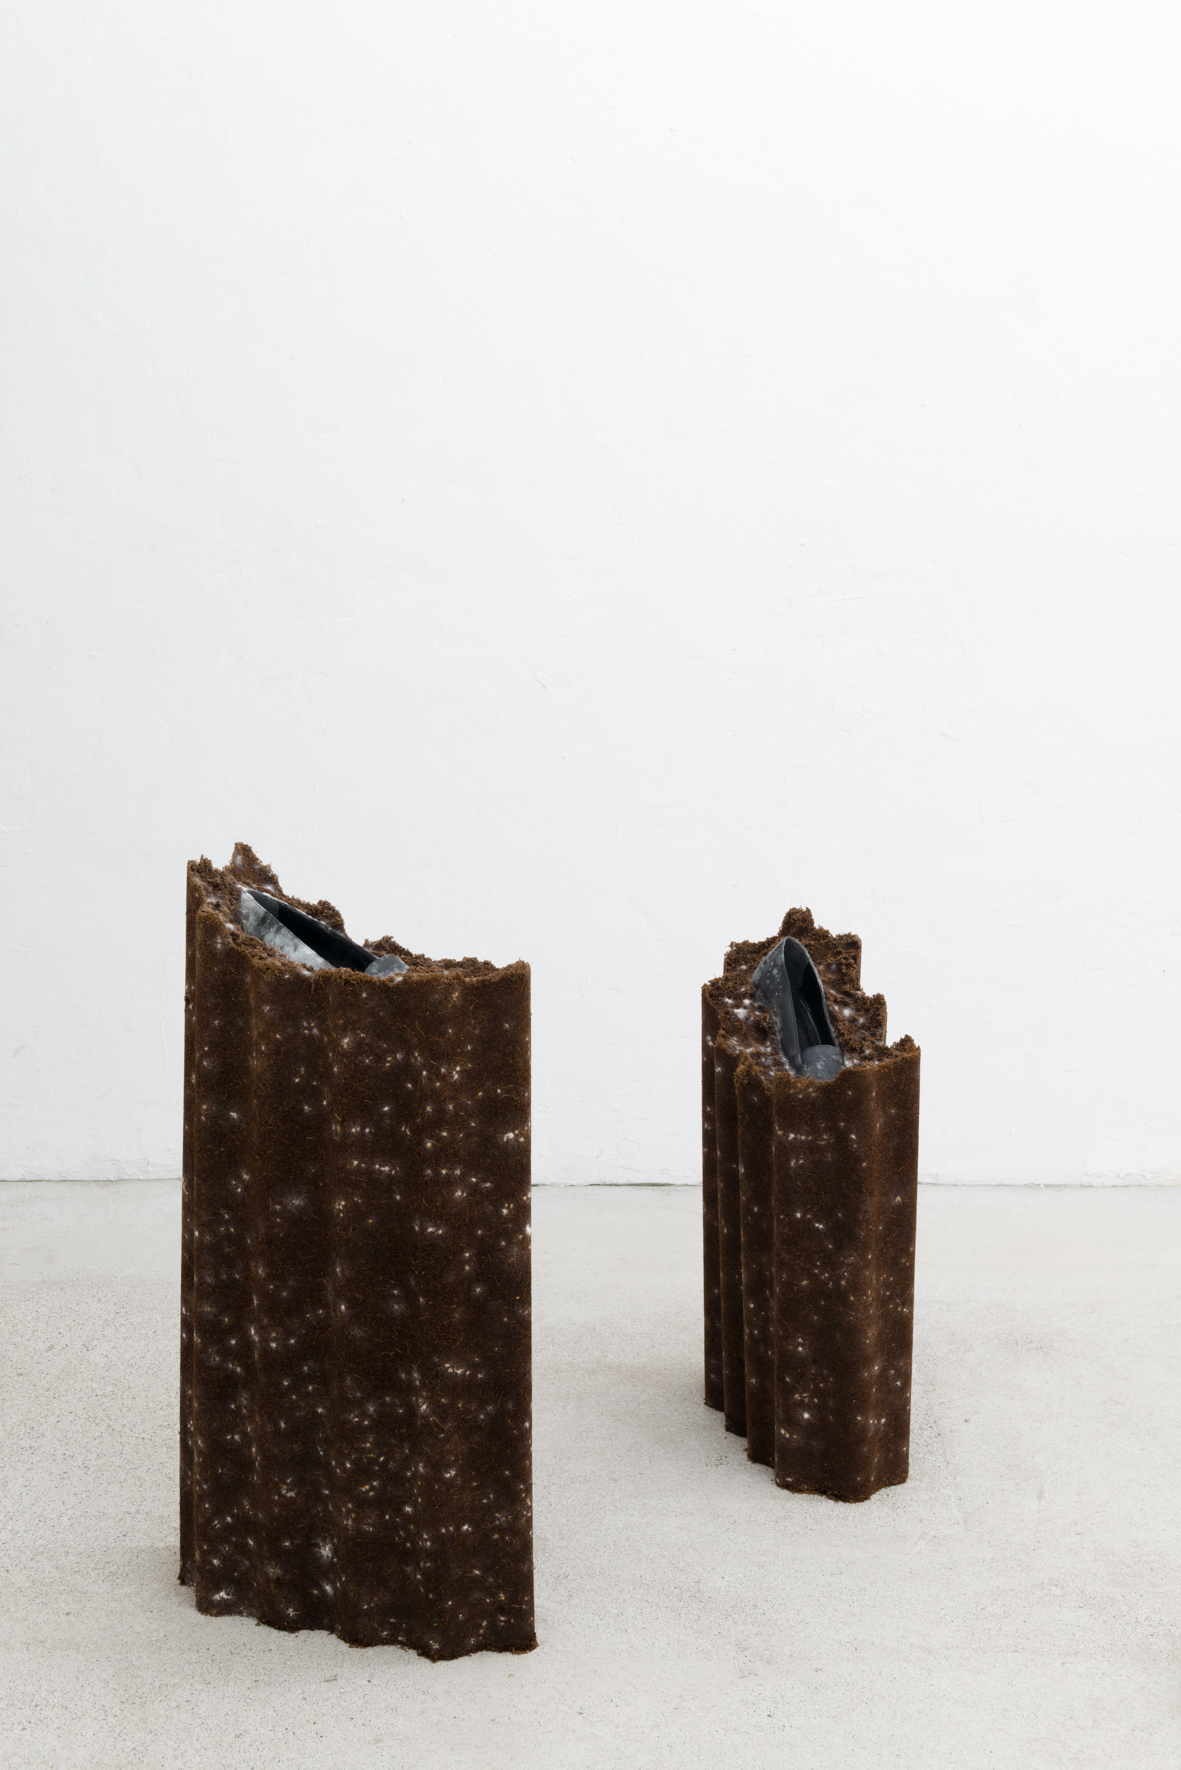 08_pina_where-the-wild-roses-grow.jpg — Angelika Loderer: Animate, 2020; coconut substrate, mycelium, leather shoes